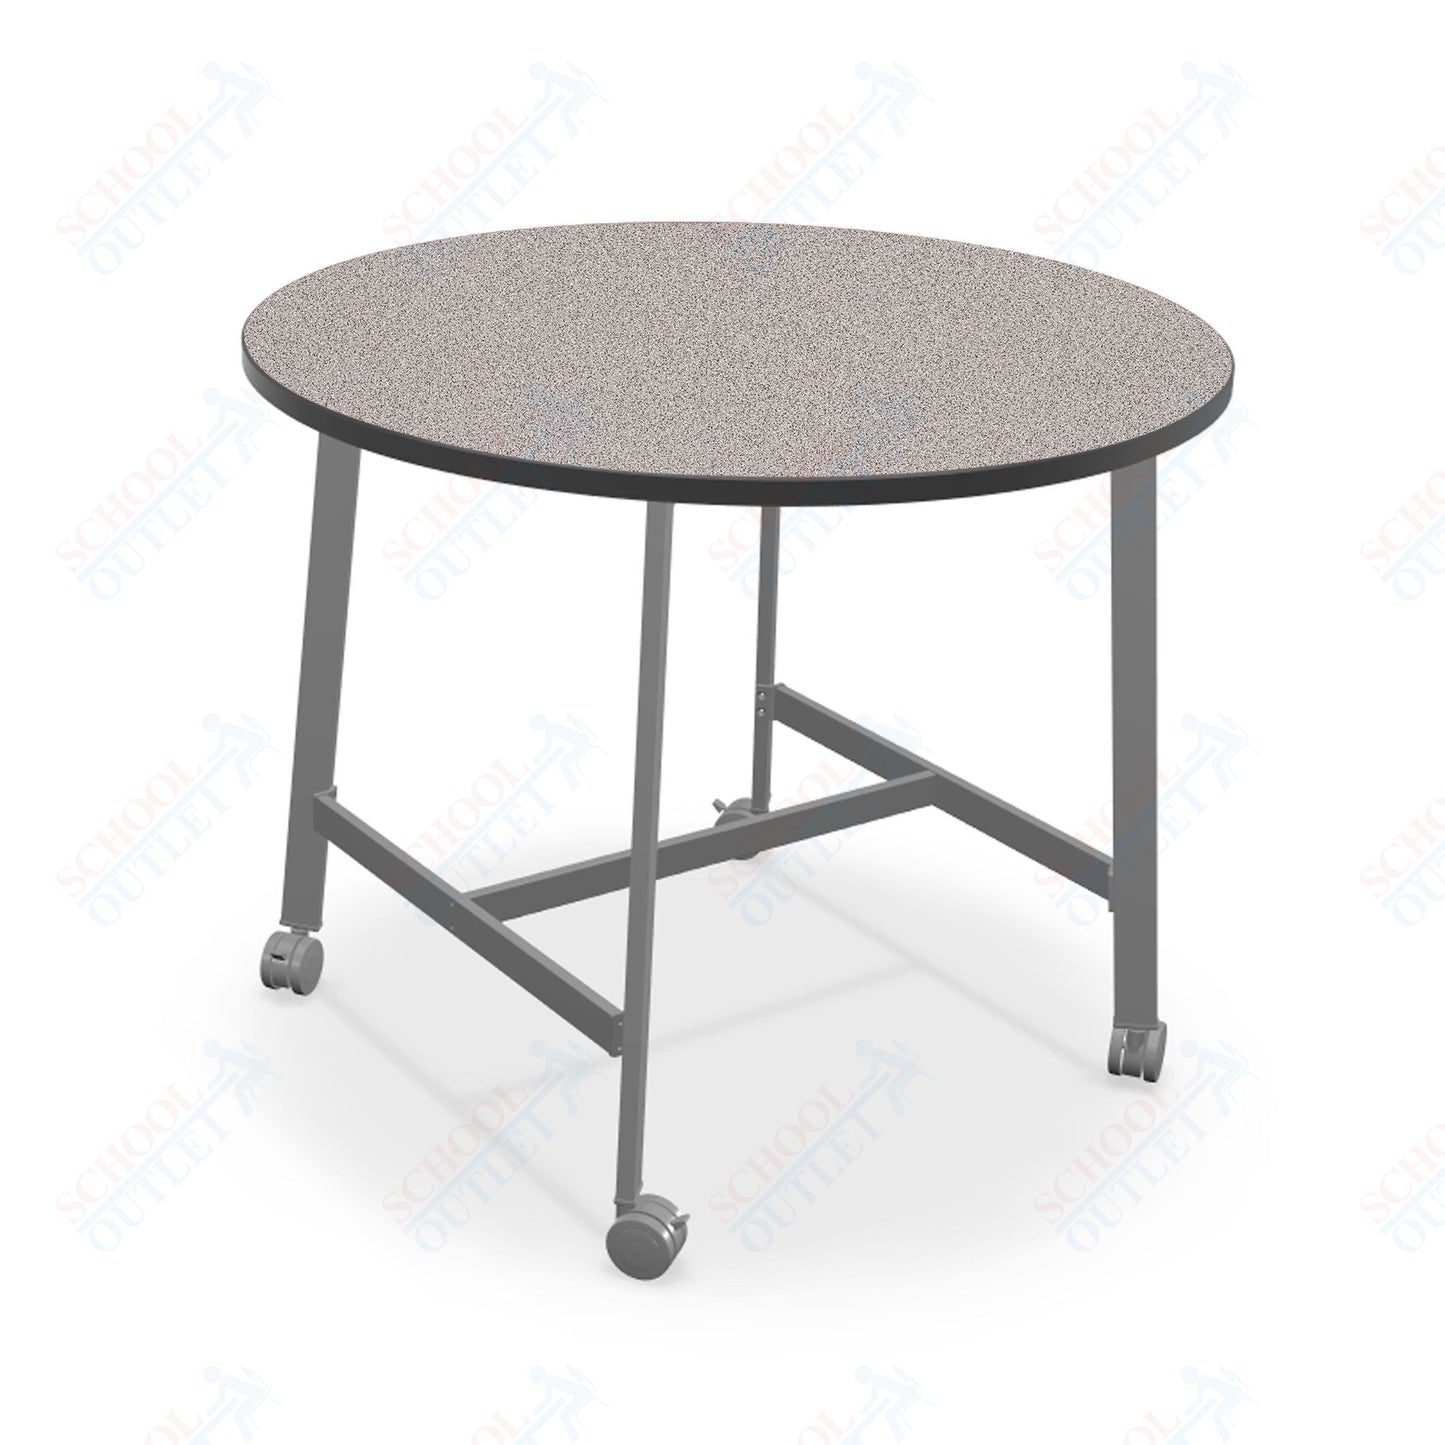 Mooreco Akt Table – 36" Round, Laminate Top, Fixed Height Available in 29"H, 36"H, or 42"H